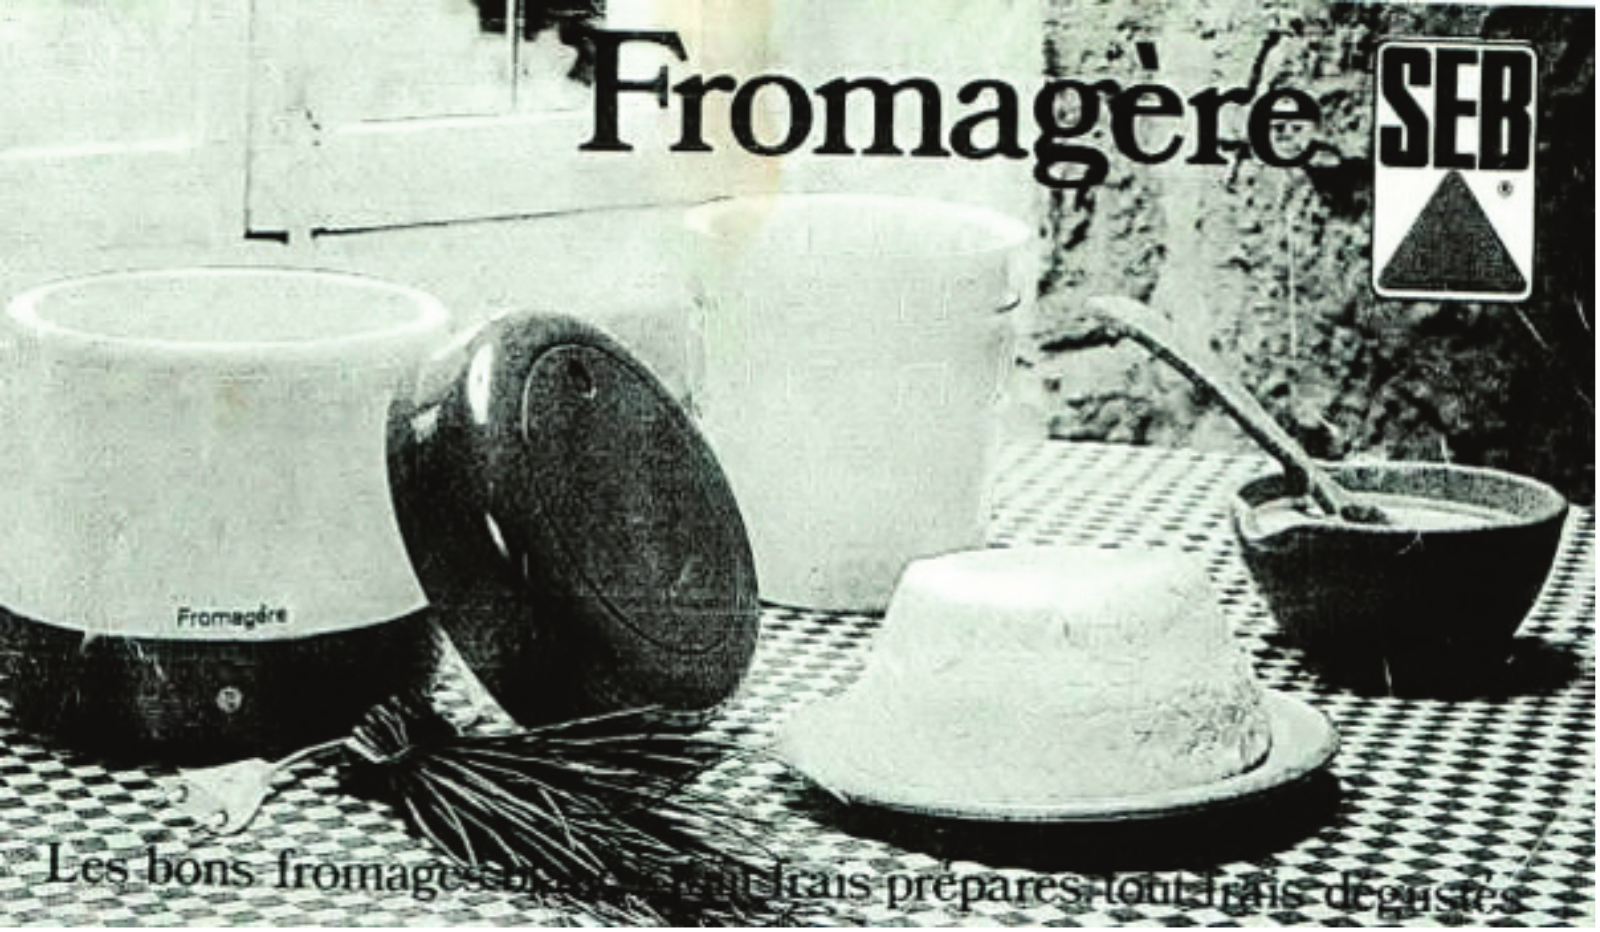 SEB FROMAGERE User Manual